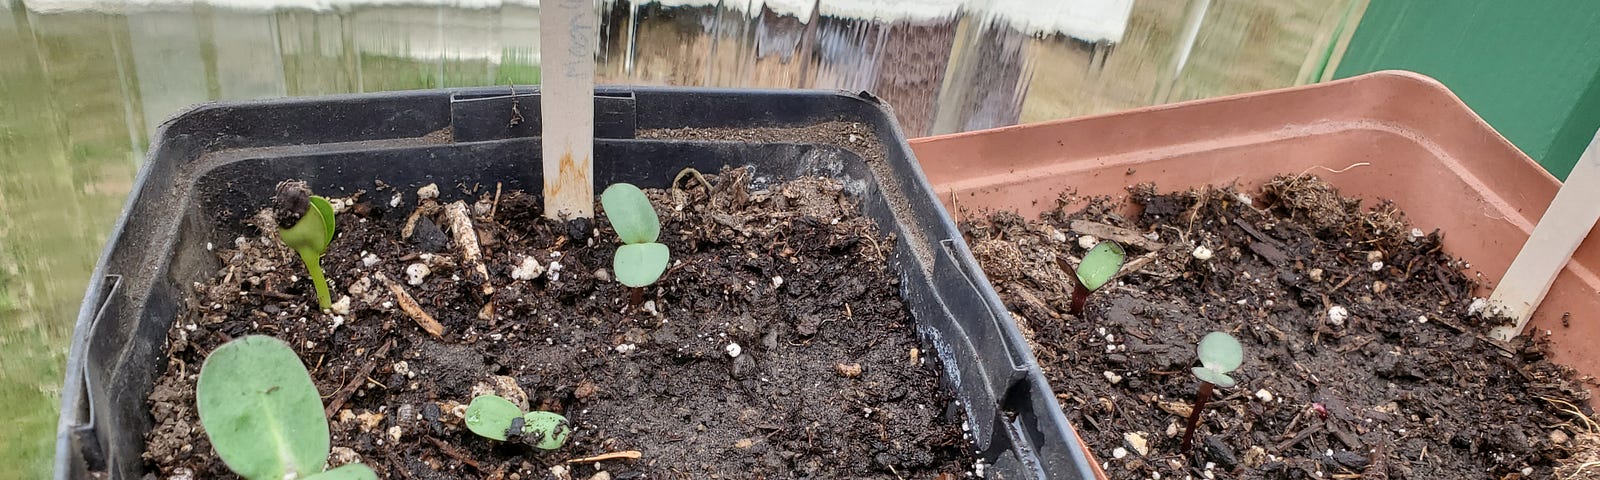 Two square plastic pots with sunflower seedlings starting to pop up.